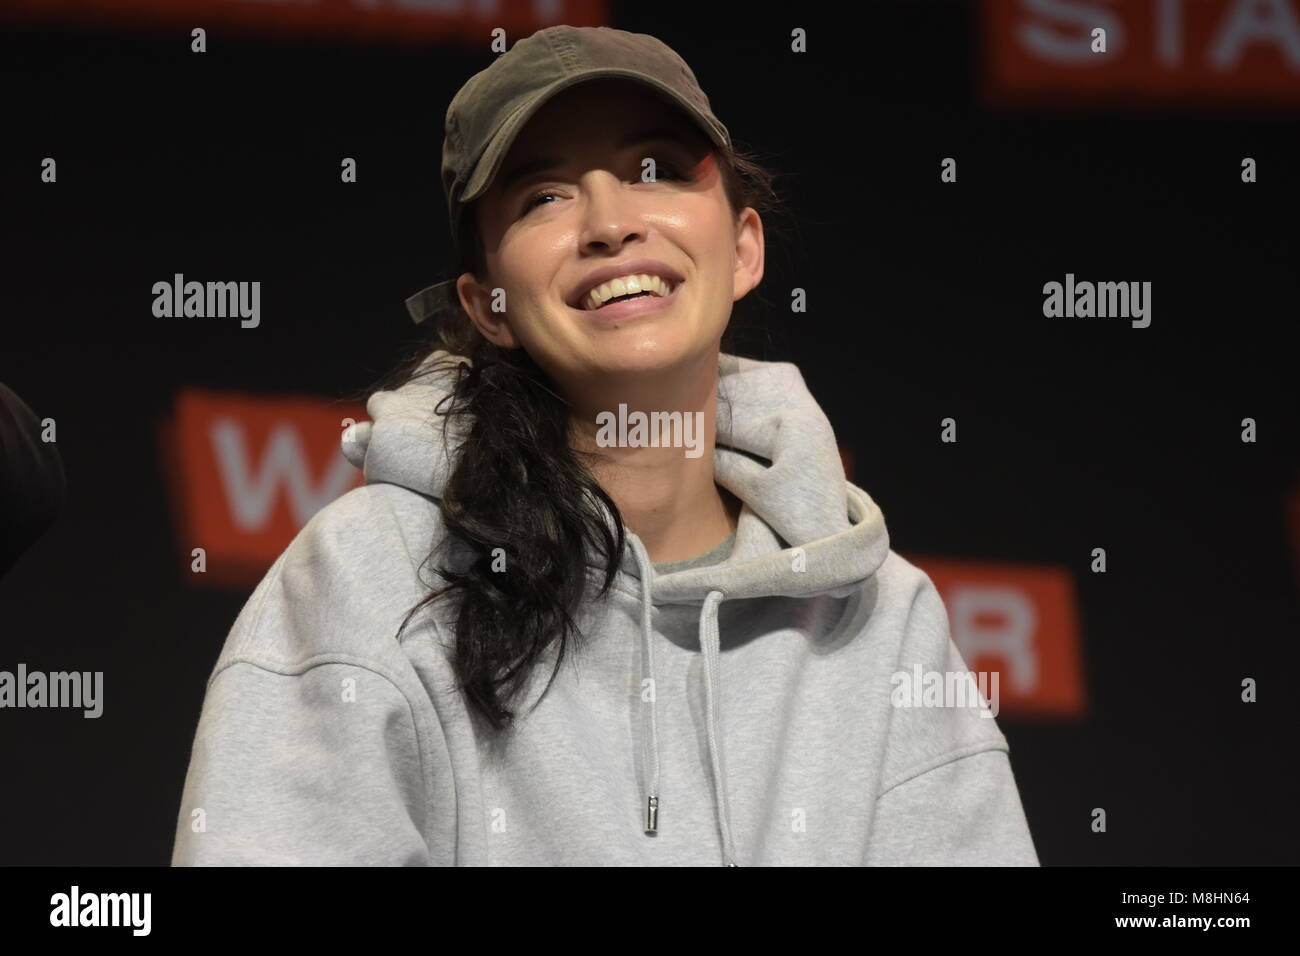 MANNHEIM, GERMANY - MARCH 17: Actress Christian Serratos (Rosita on The Walking  Dead) at the Walker Stalker Germany convention. (Photo by Markus Wissmann  Stock Photo - Alamy